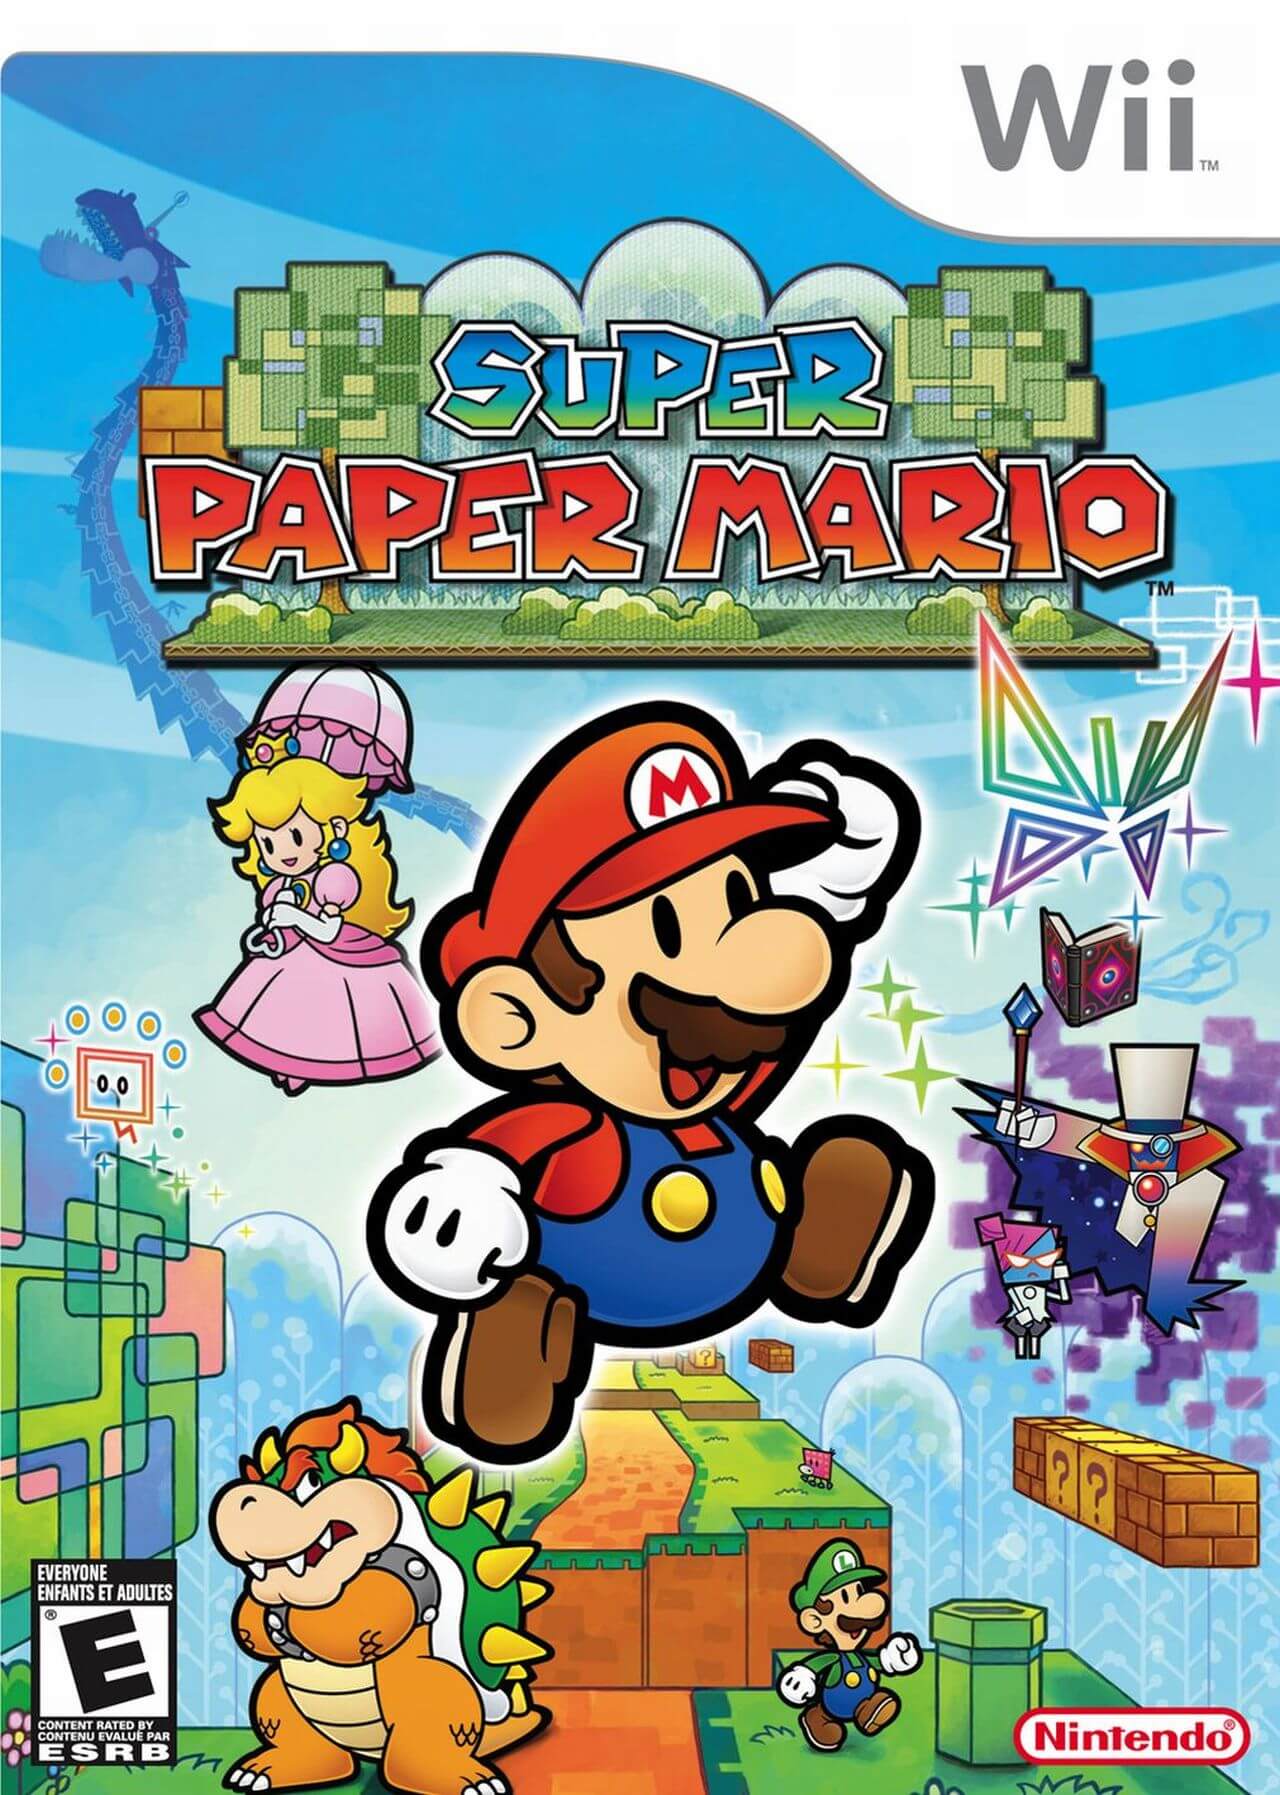 Super Paper Mario Wii Game ROM Nkit & WBFS Download